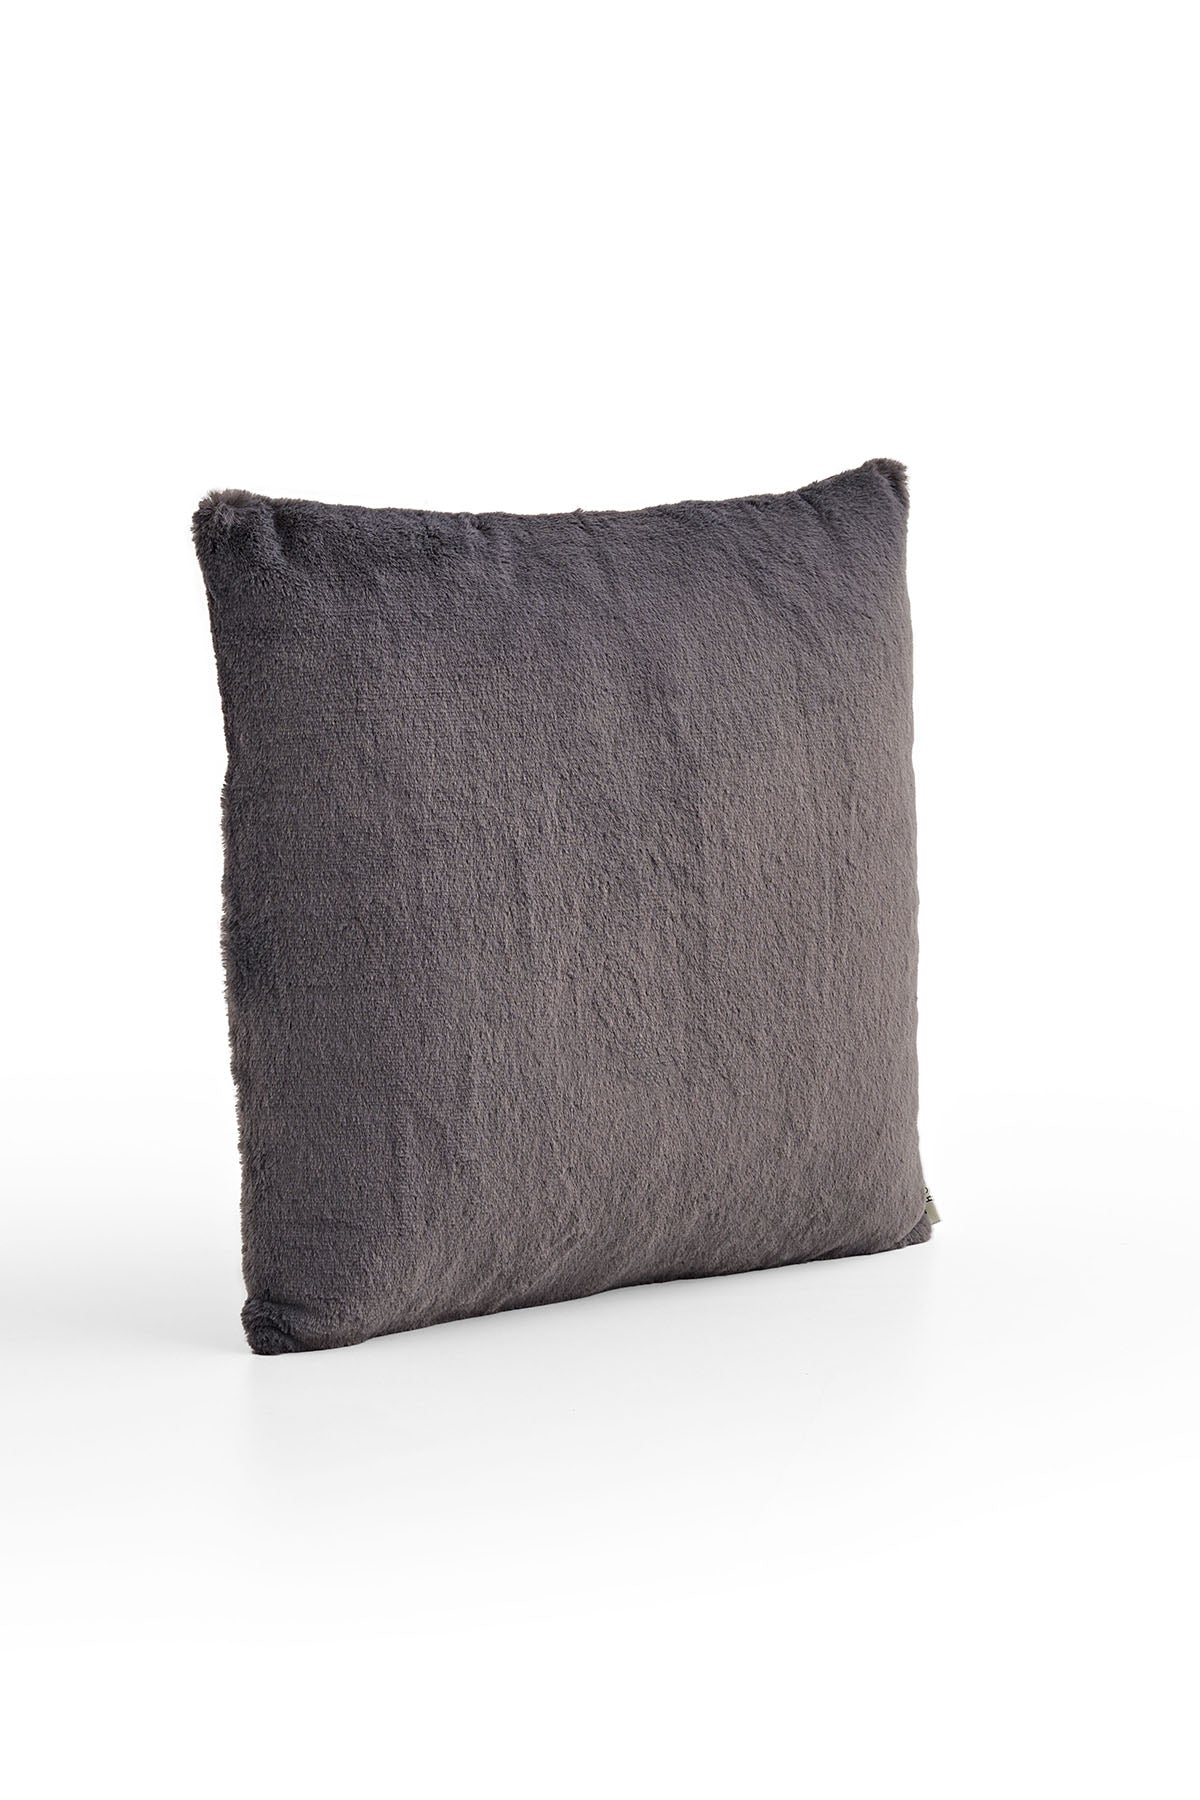 Anthracite Lace Pillow